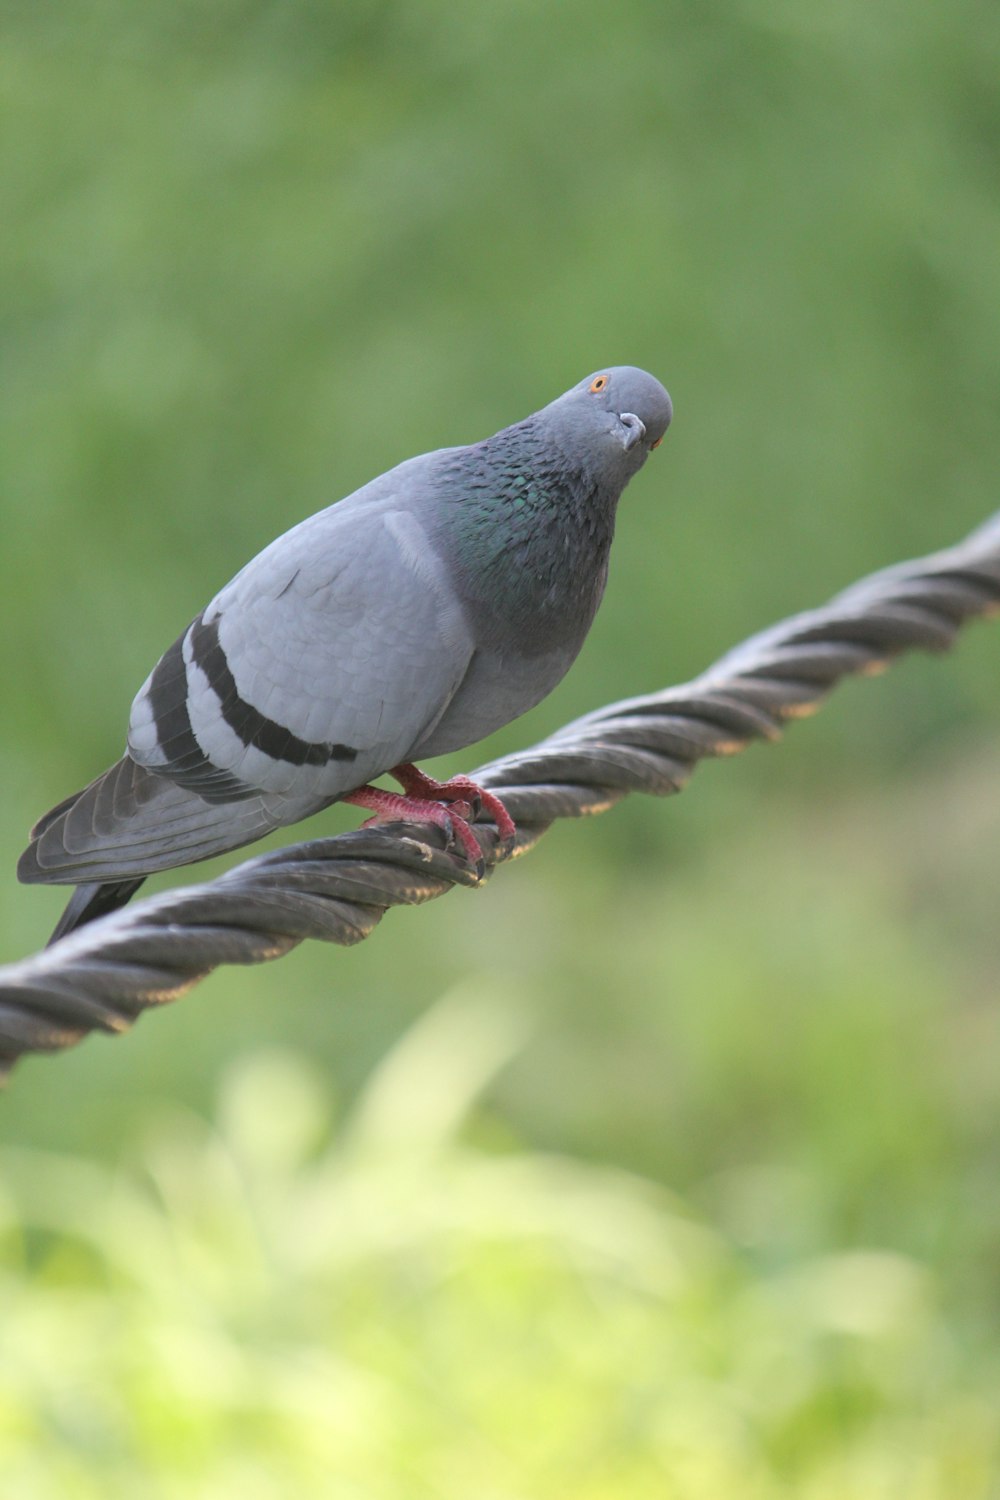 a pigeon sitting on a rope in a field